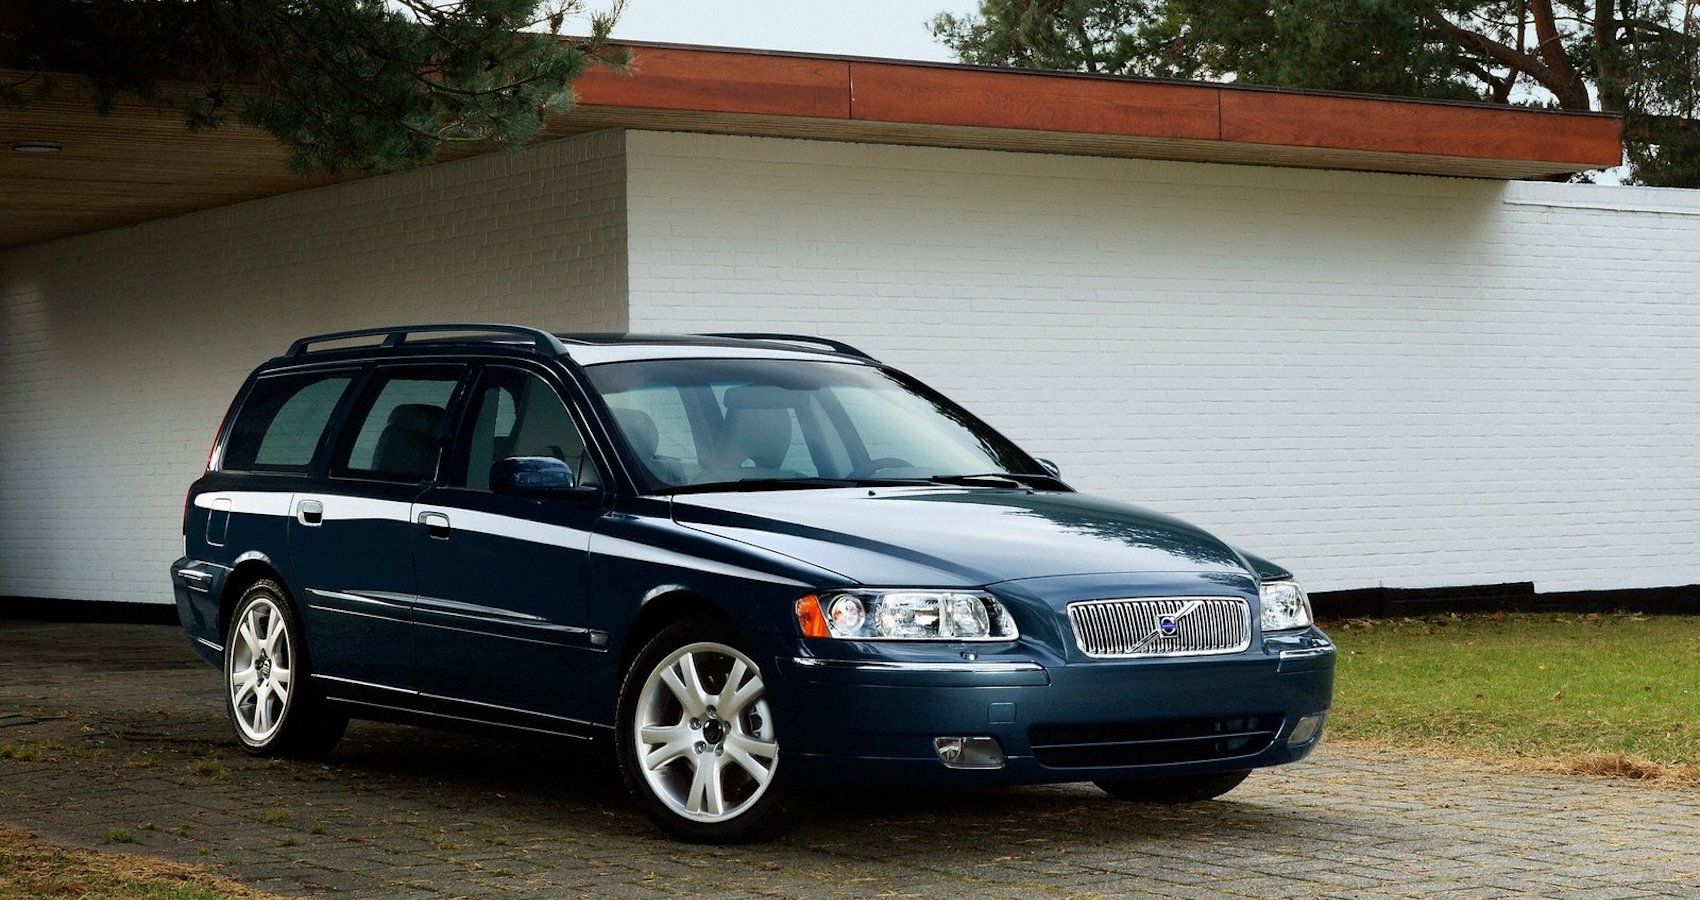 10 Reasons Of Best Family Haulers Always The Has Volvo One The V70 Been